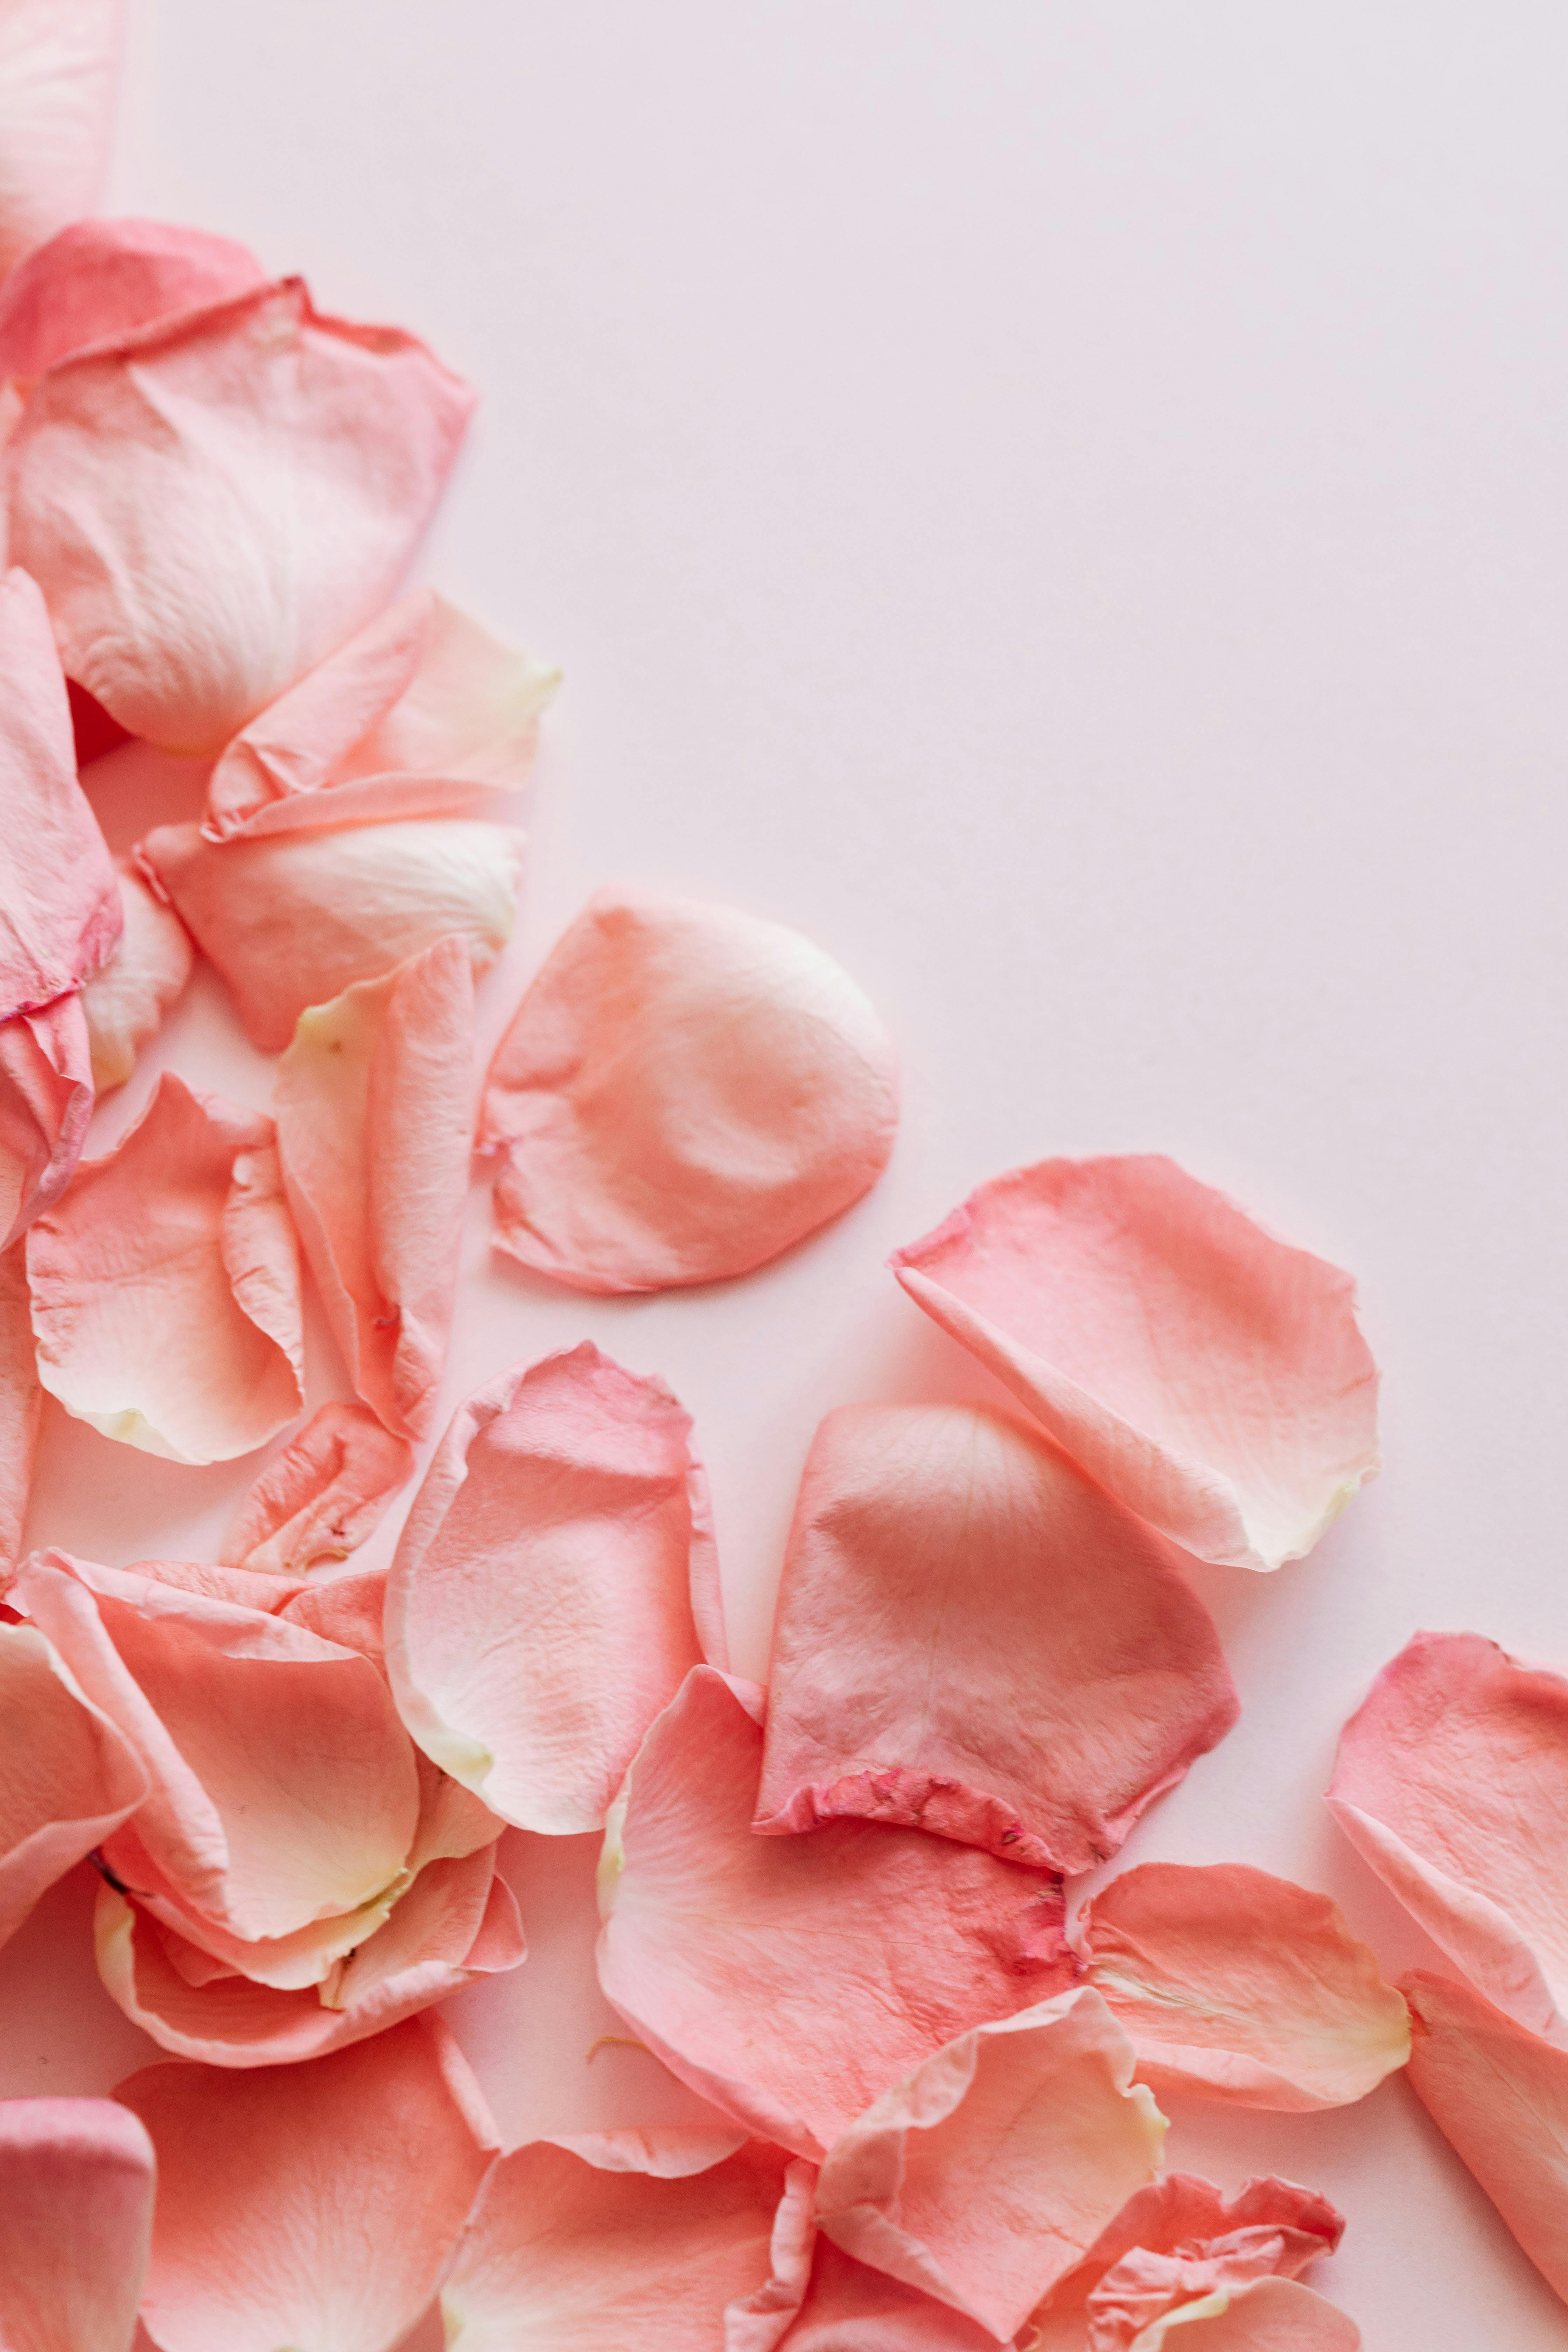 Set of pink rose petals on white background · Free Stock Photo